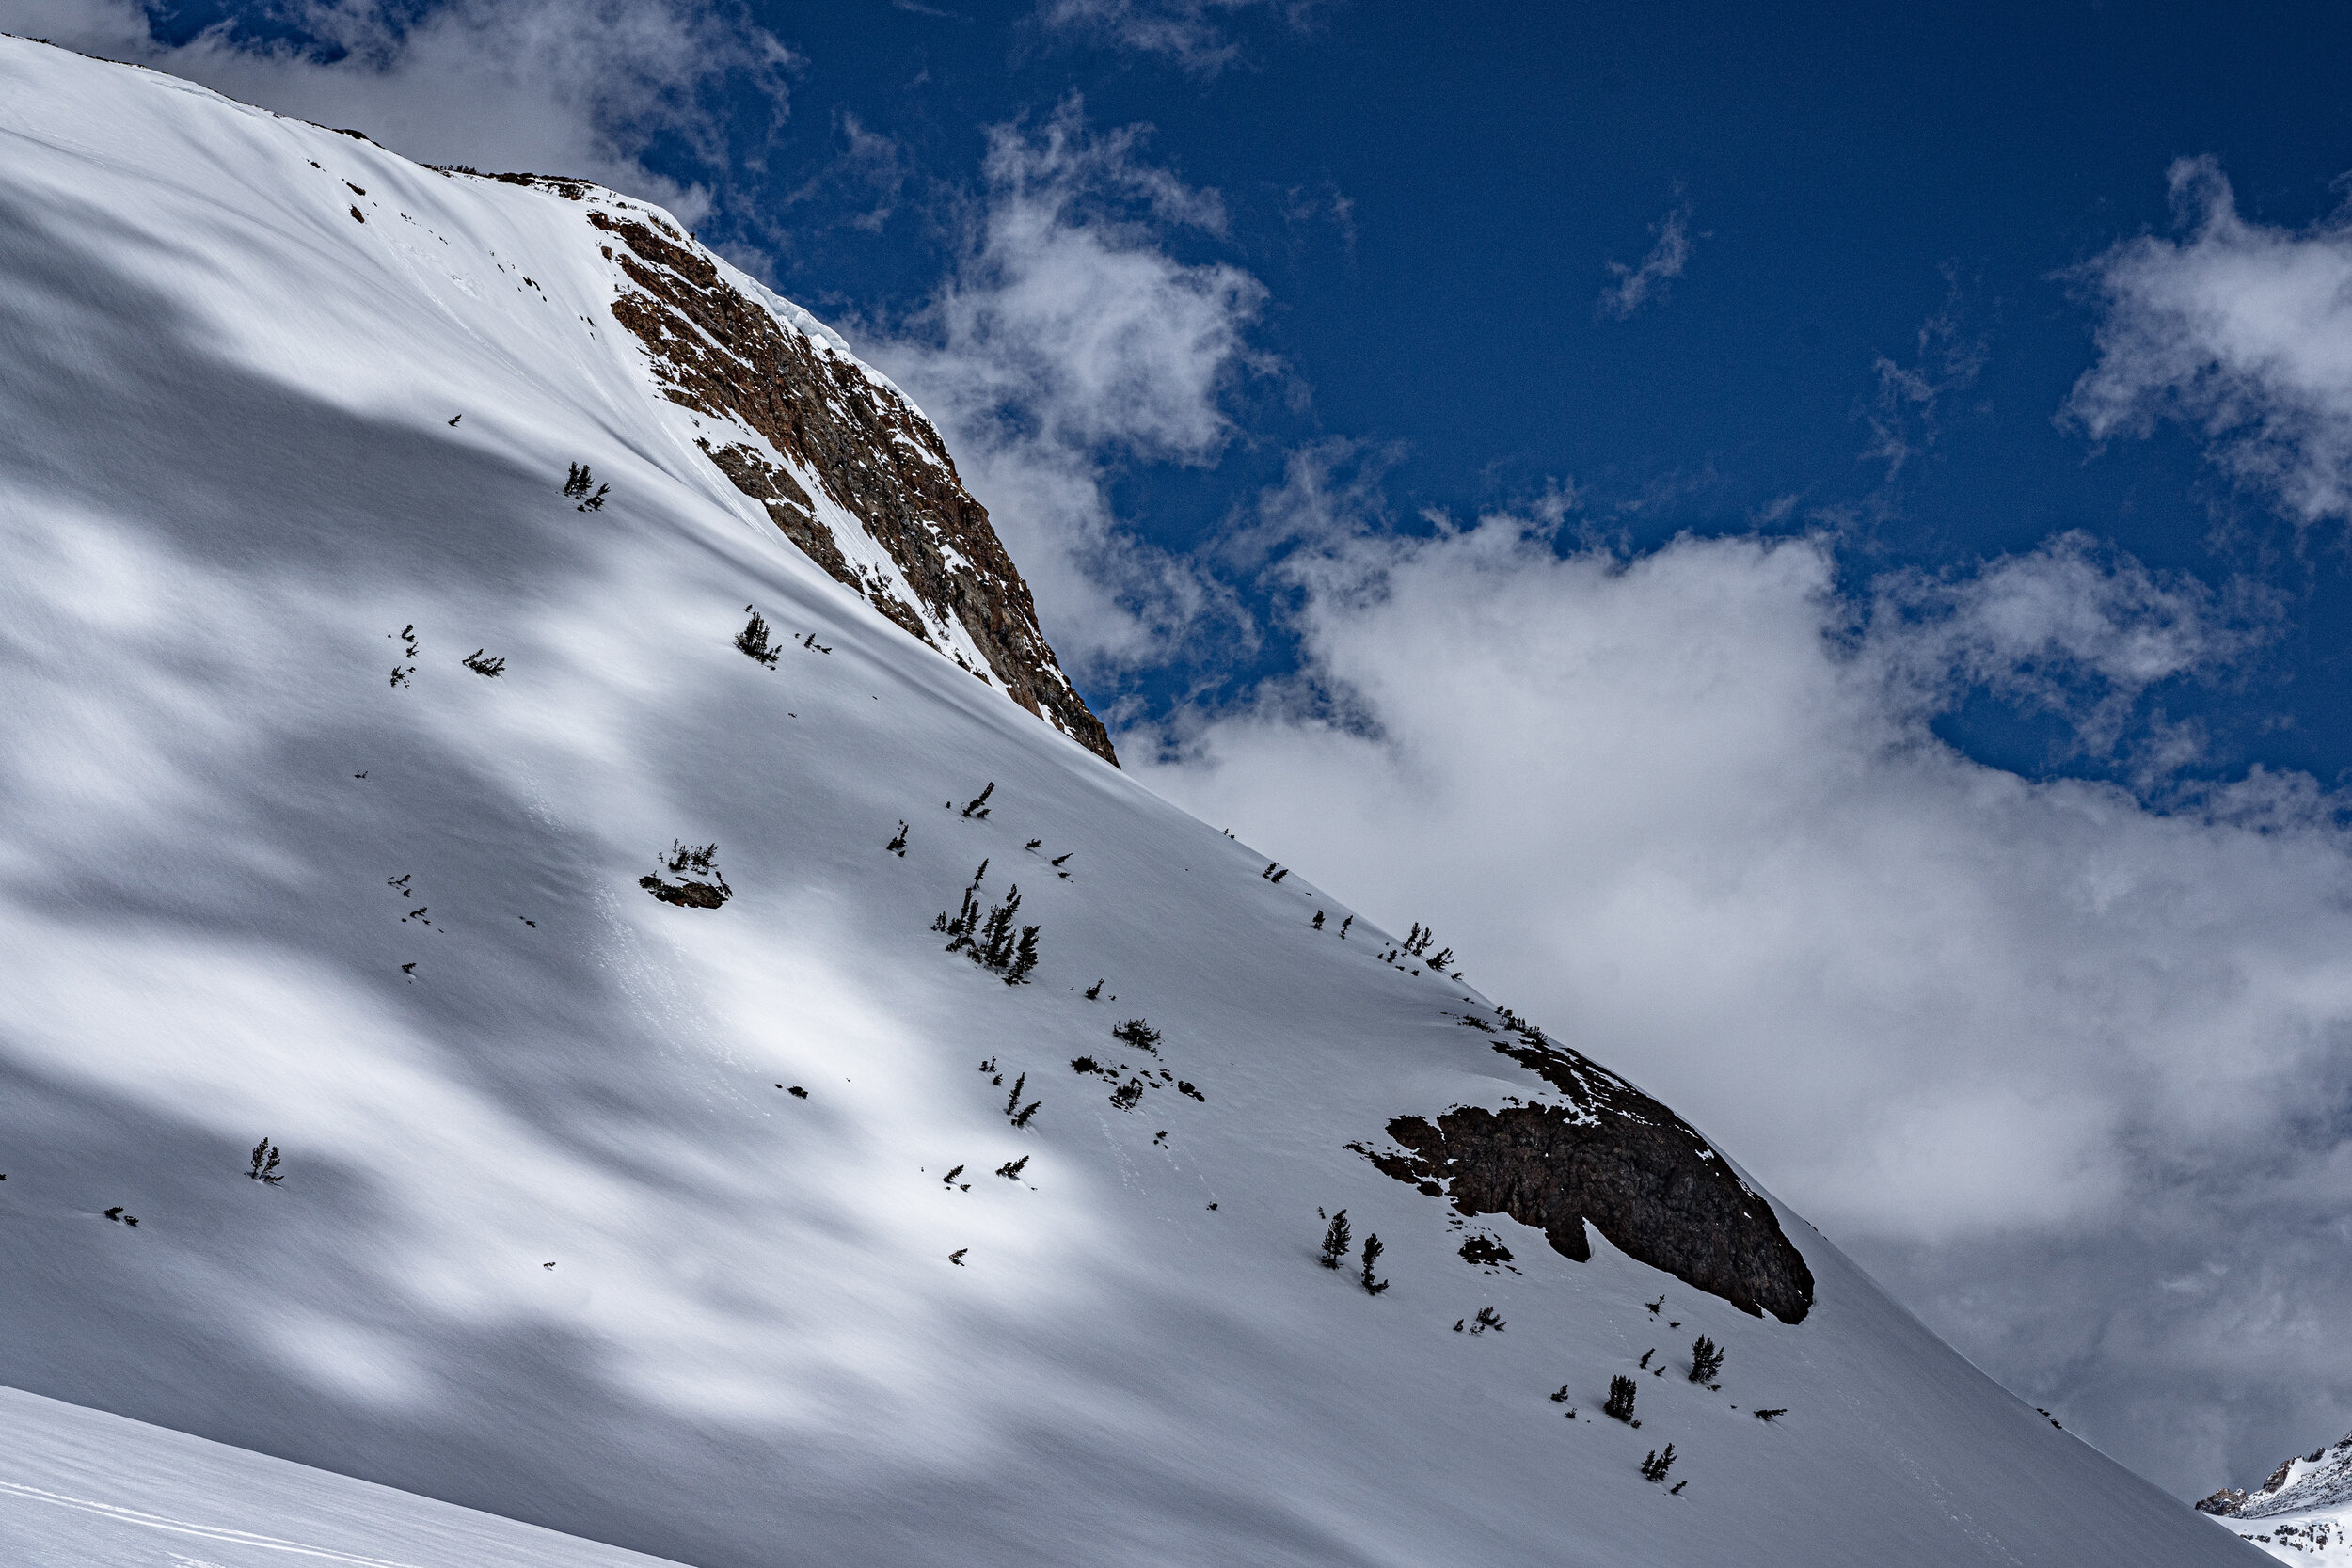  The combination of cornices overhanging our intended route and warm sun made us reconsider our plans.  